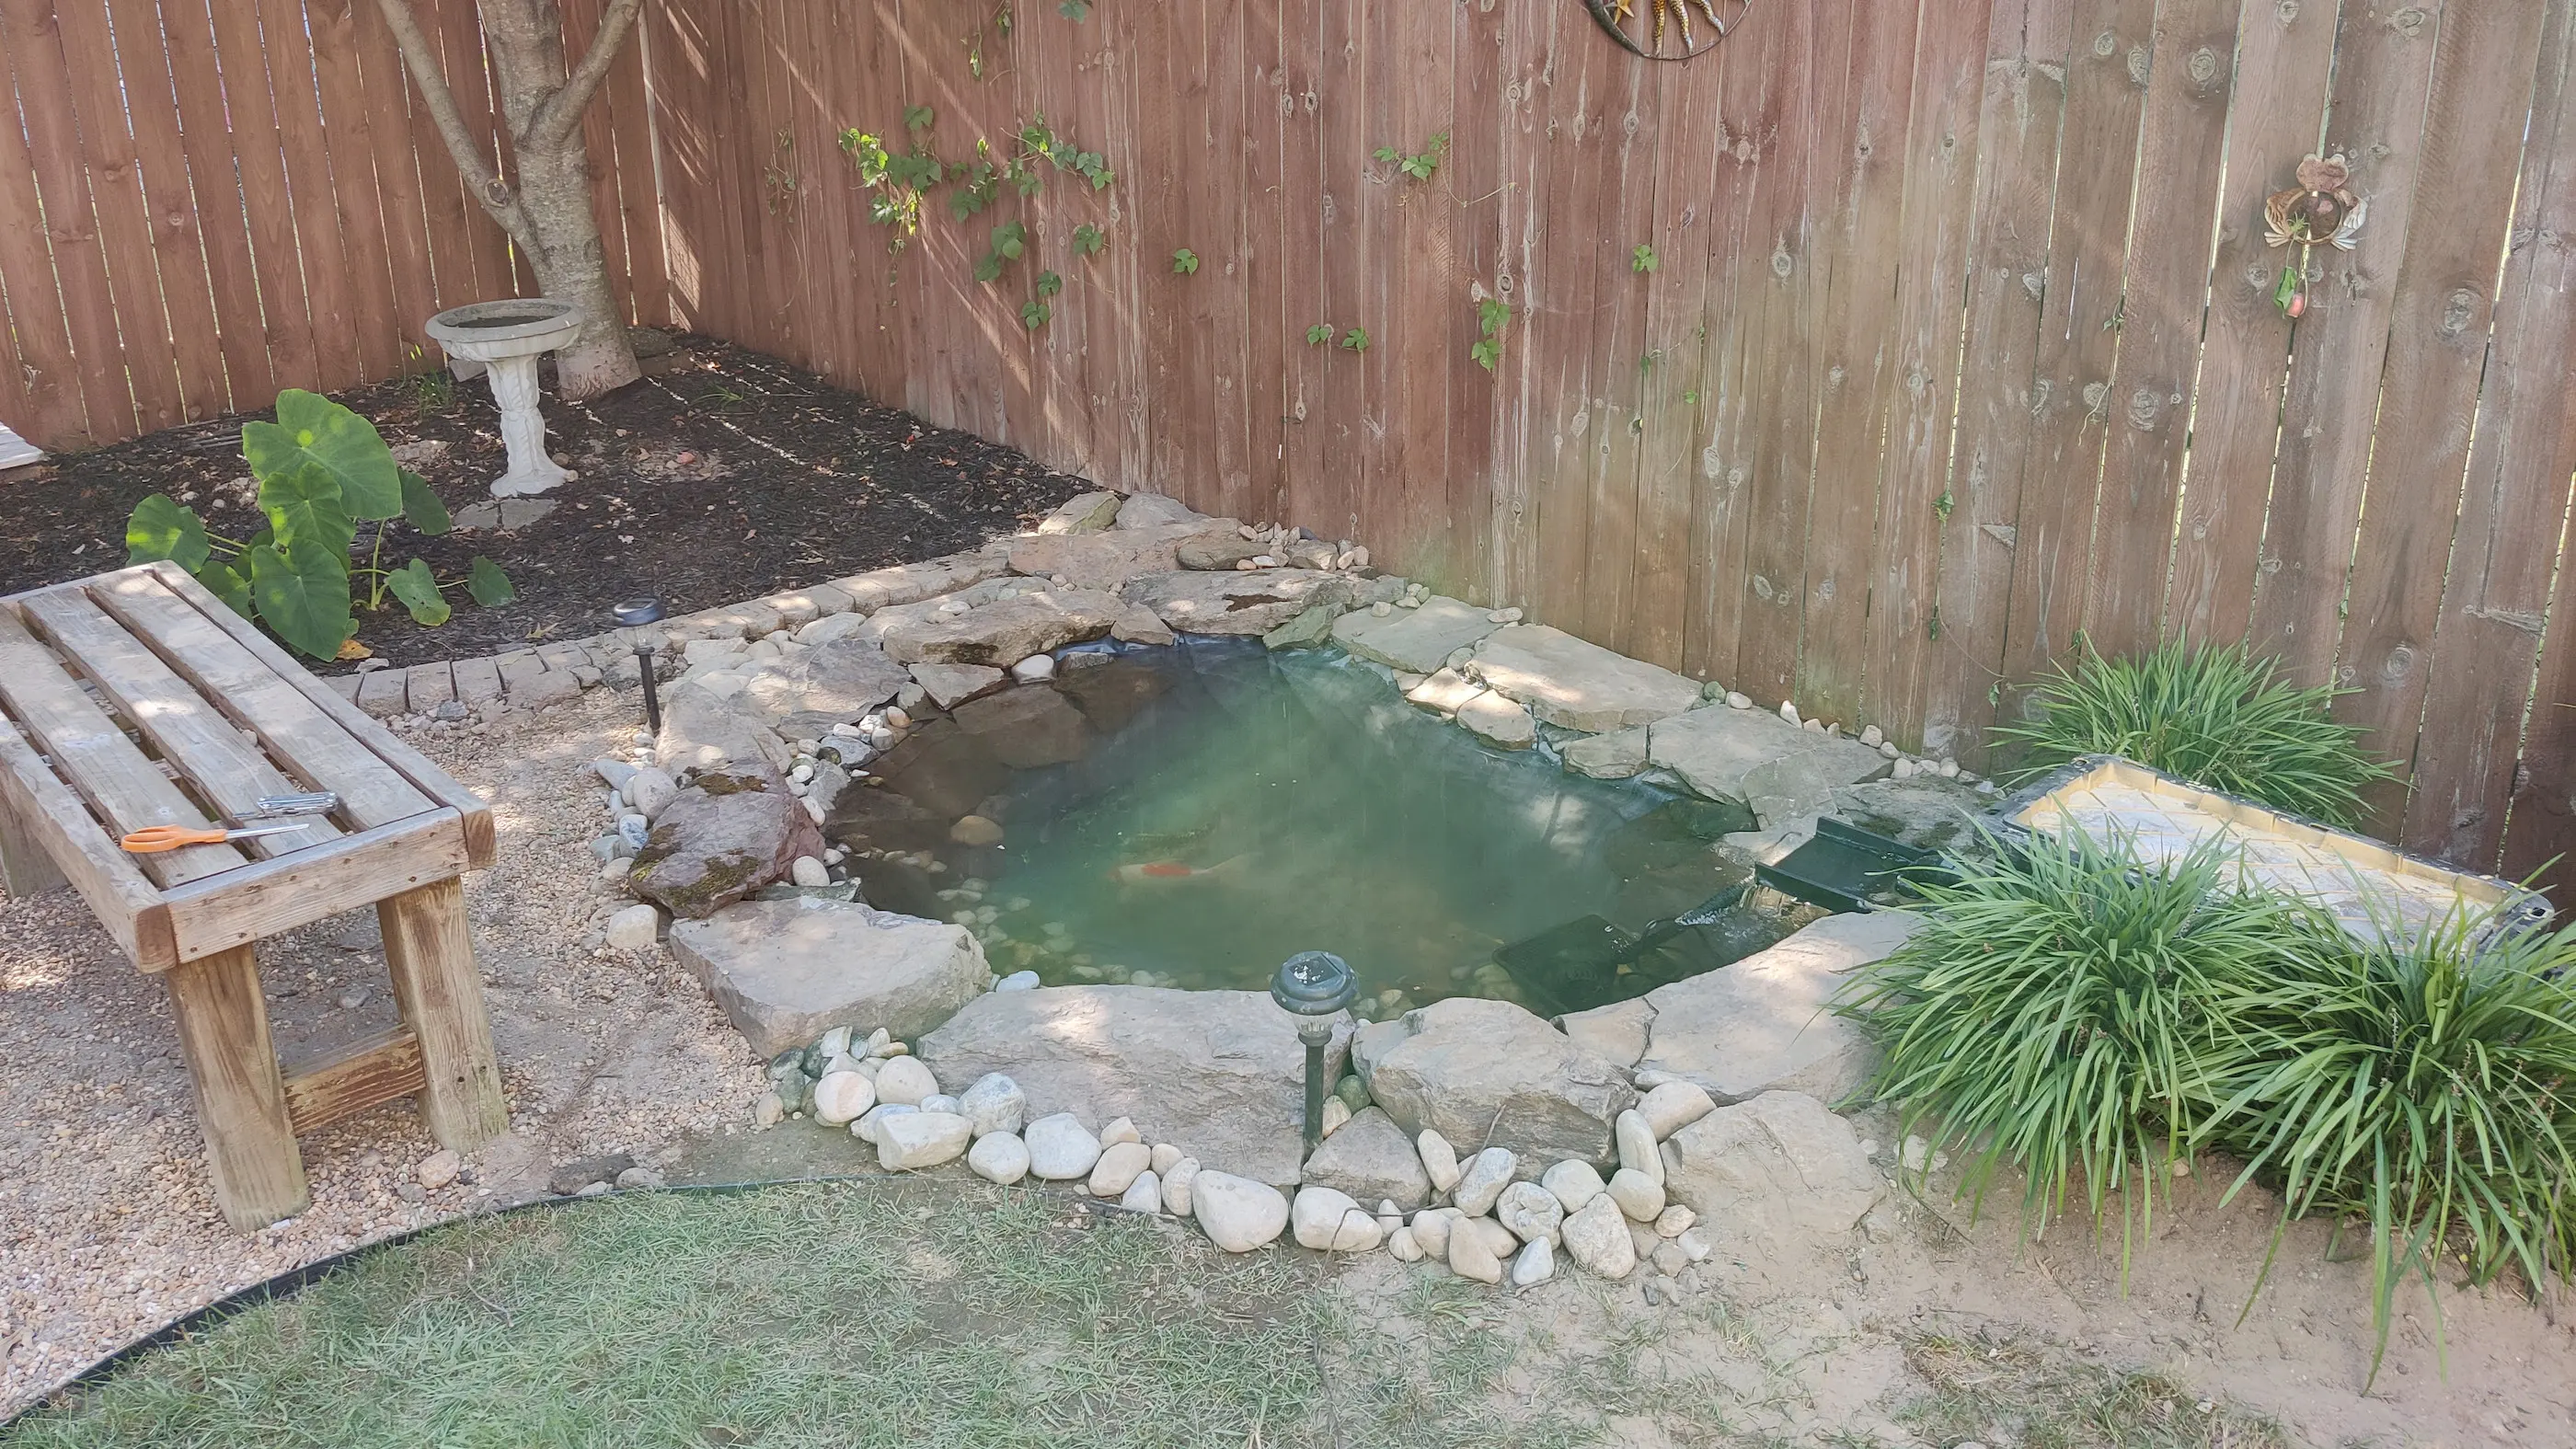 Our client noticed that her fish were acting weak so she called us to take a look at the pond.
						Upon inspecting the pond, we determined that it needed a full clean out as the water was cloudy and full of toxins from a fish that died.
						After getting the pond cleaned, our client decided to enlarge it as her fish had outgrown the current space.
						An enlarged pond would be beneficial for the fish because larger bodies of water are more stable and less
						prone to a chemical imbalances such as ammonia spikes. We excavated a larger hole, added new liner, and rebuilt
						the pond with large boulders.